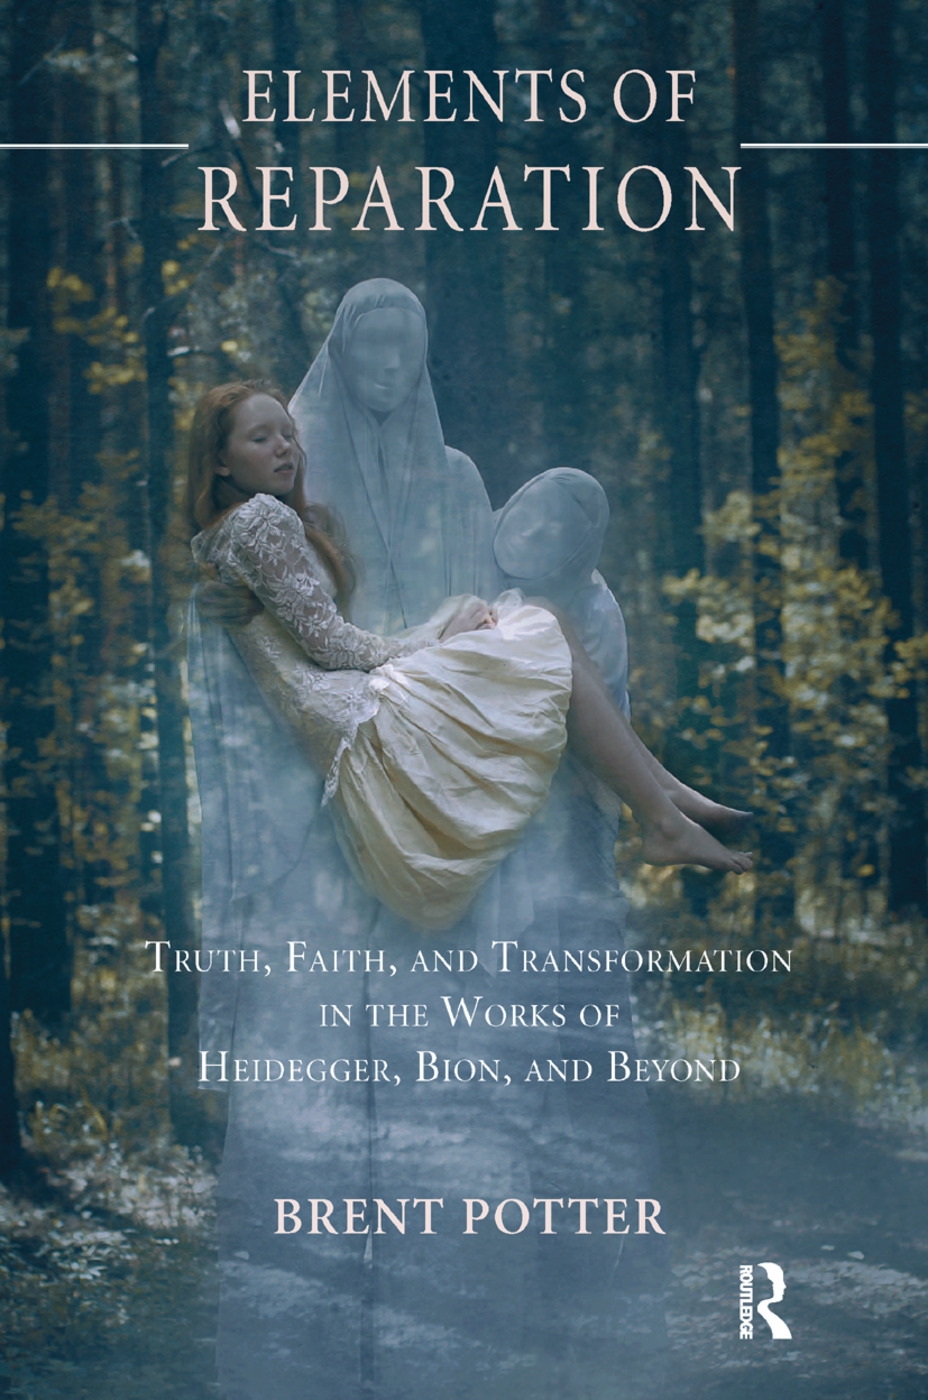 Elements of Reparation: Truth, Faith, and Transformation in the Works of Heidegger, Bion, and Beyond